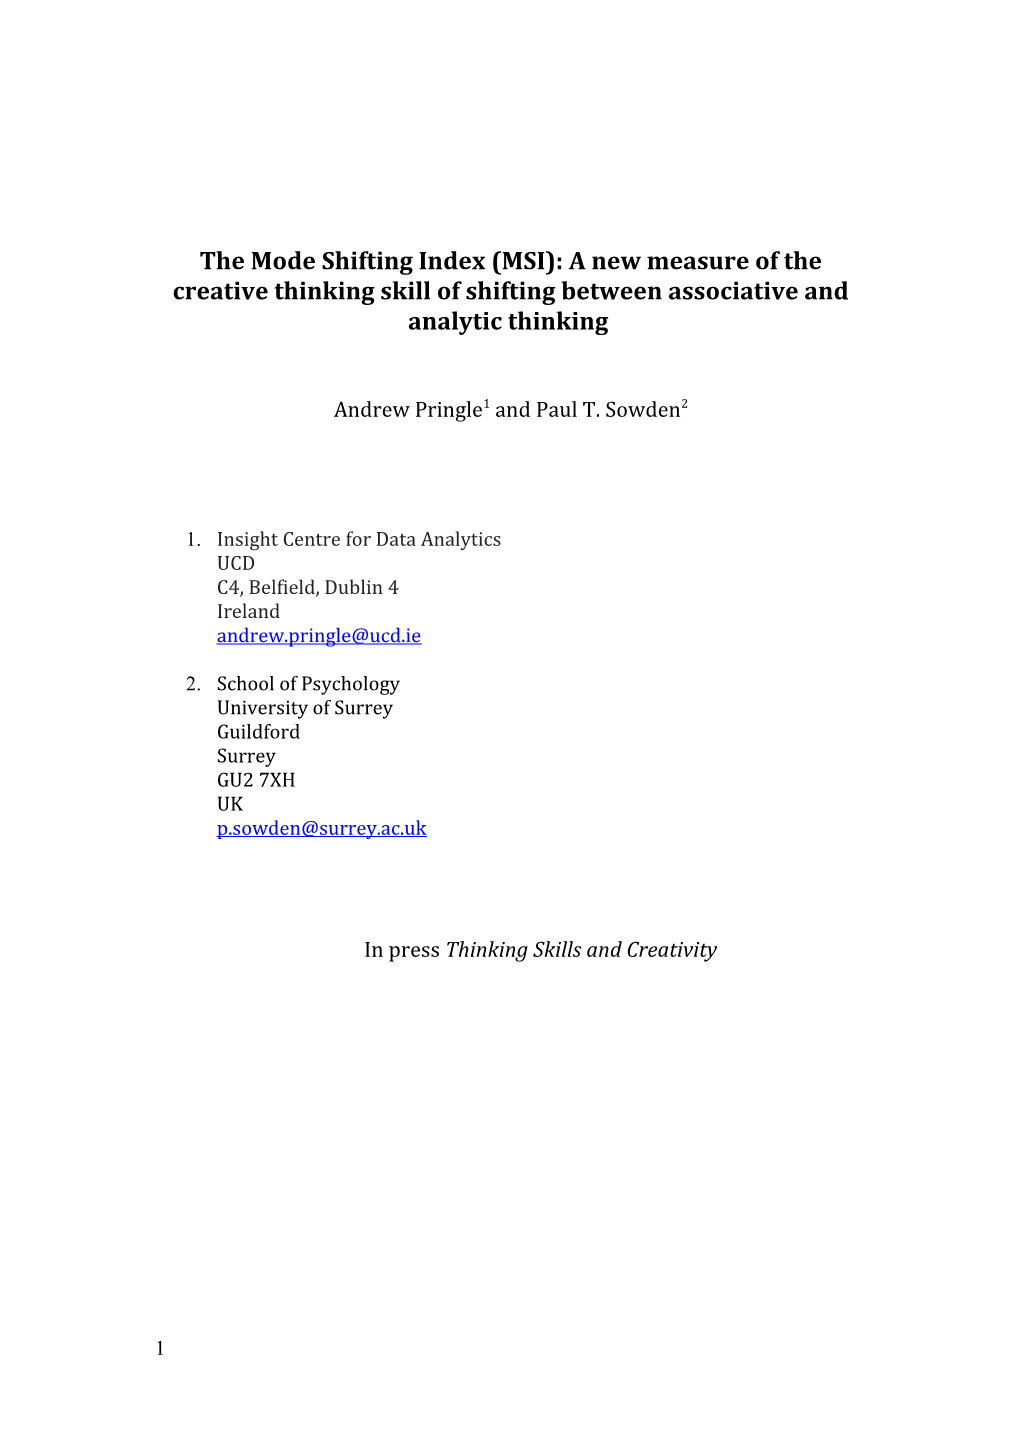 The Mode Shifting Index (MSI): a New Measure of the Creative Thinking Skill of Shifting